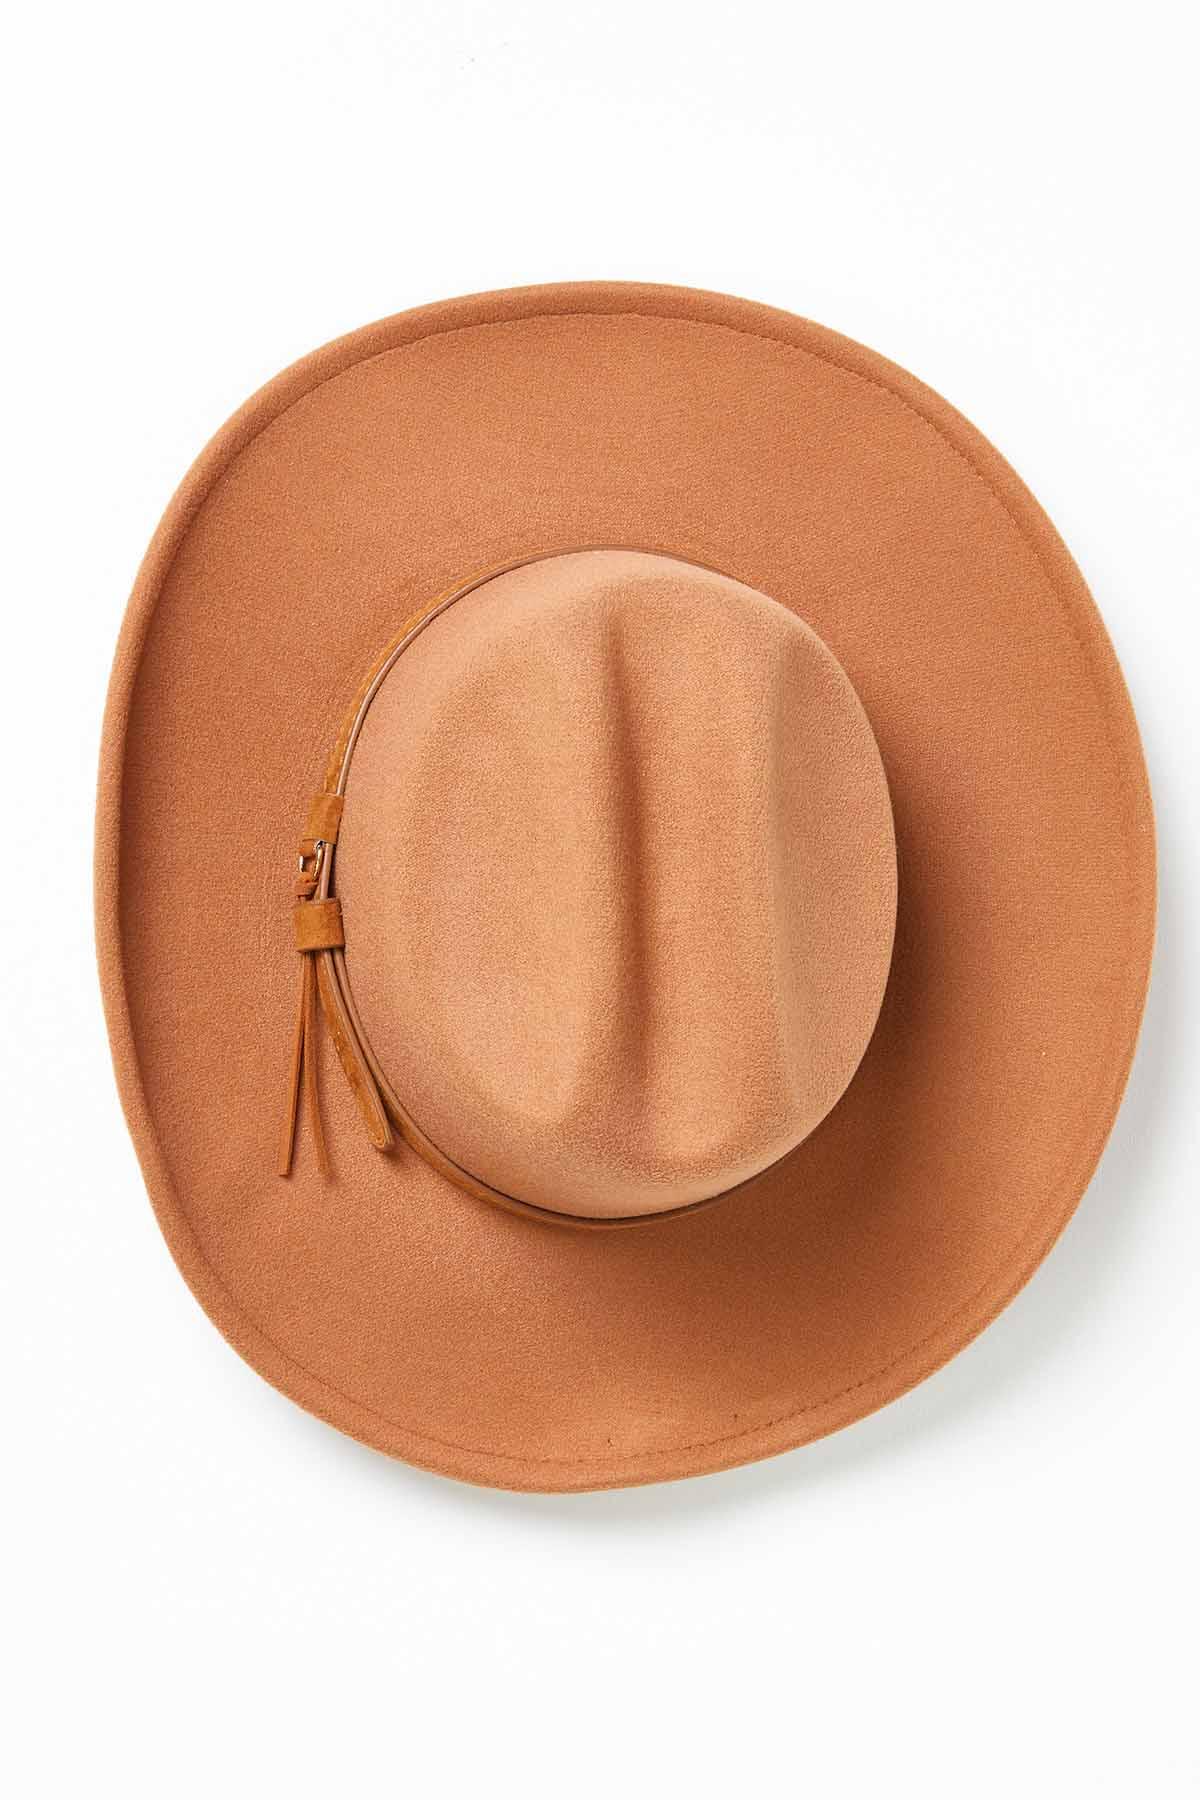 Classic Brown Western Hat